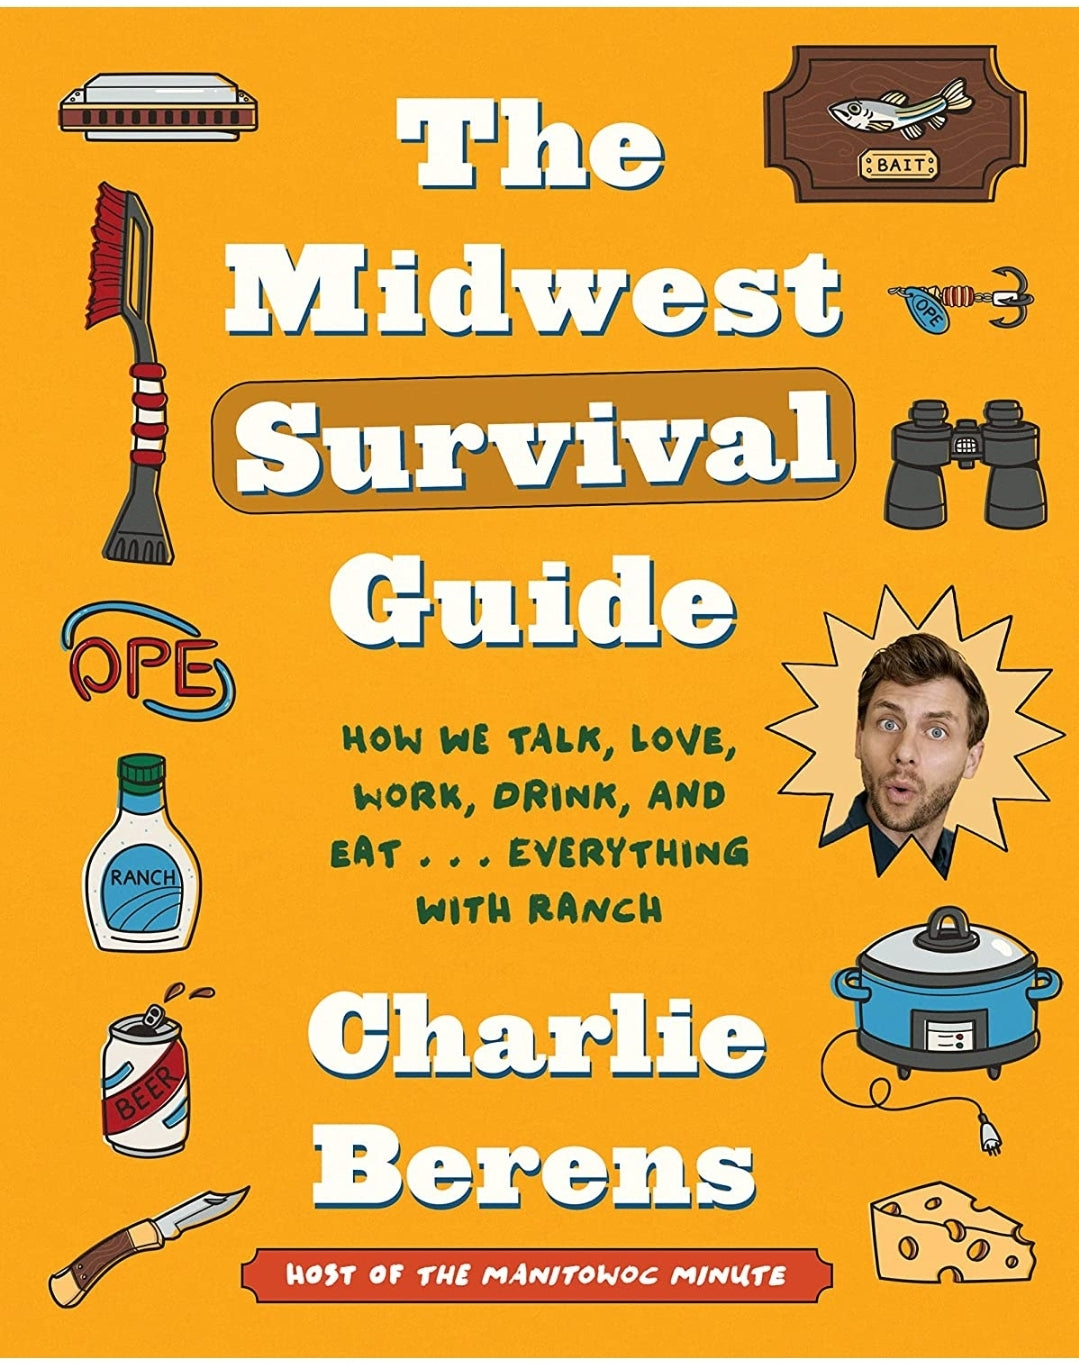 The Midwest Survival Guide: How We Talk, Love, Work, Drink, and Eat . . . Everything with Ranch